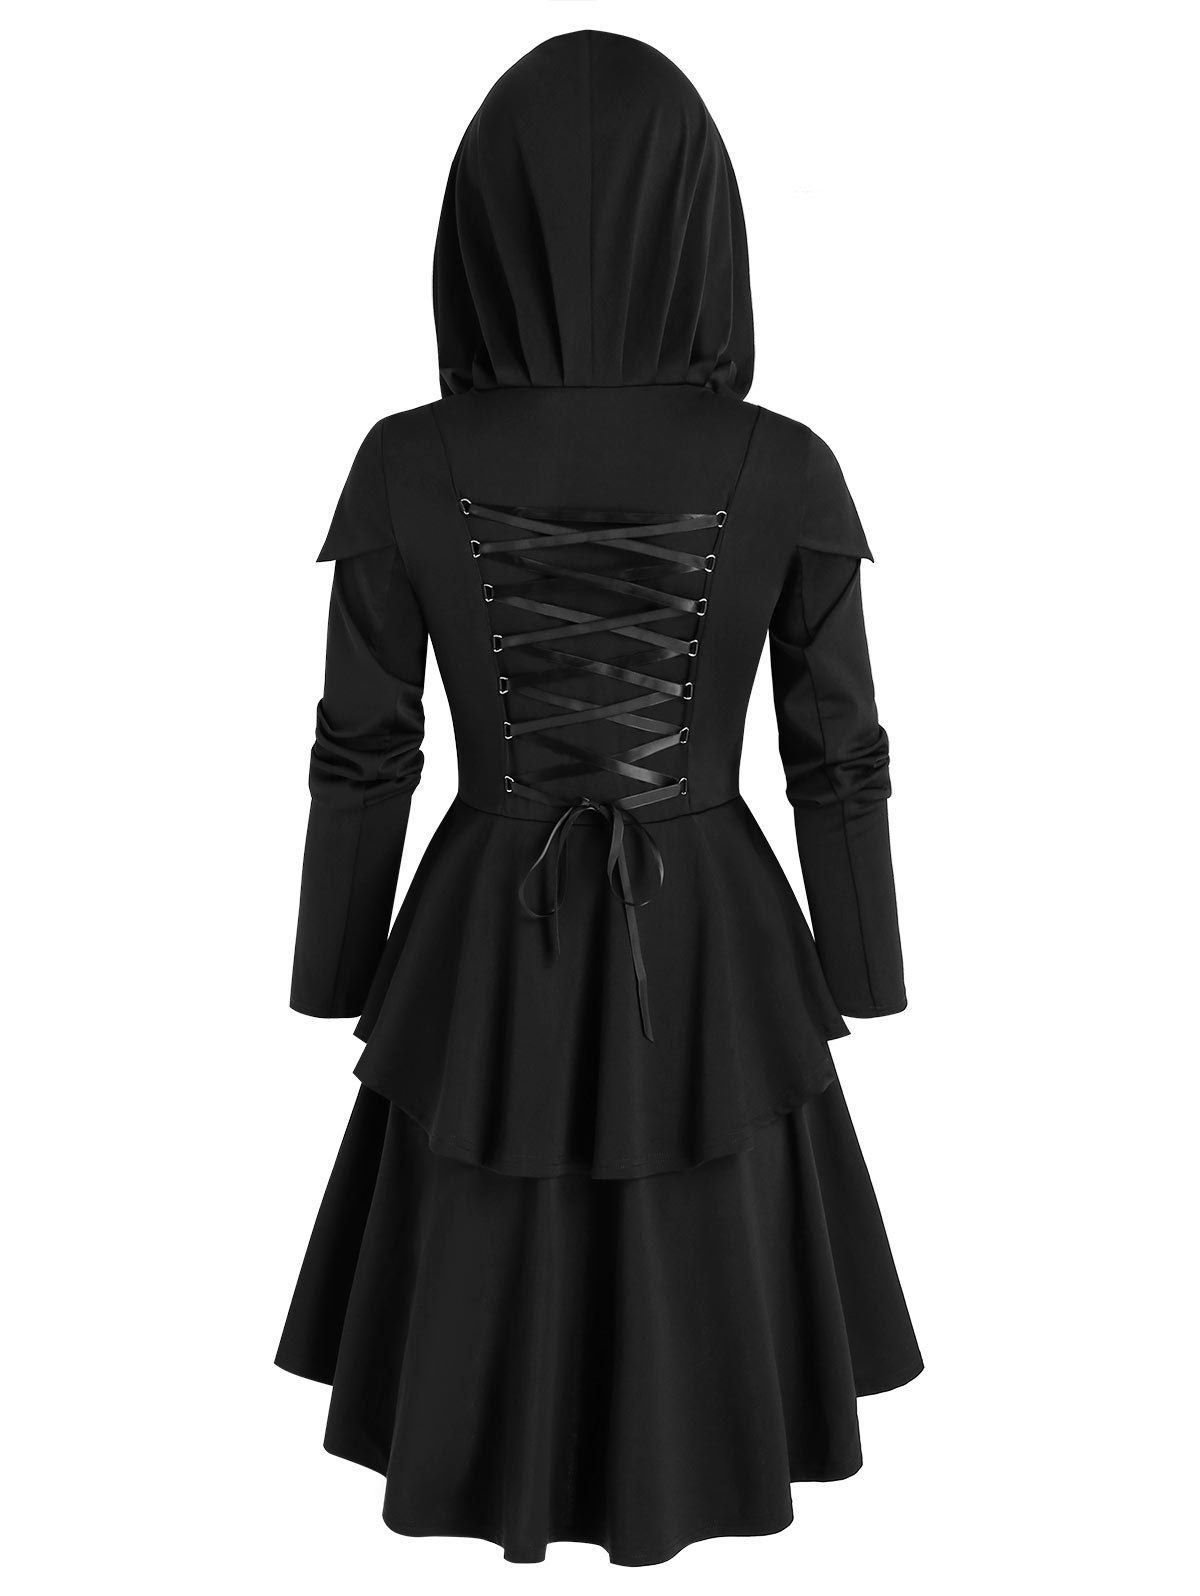 [34% OFF] 2020 Hooded Lace-up High Low Skirted Coat In BLACK | DressLily